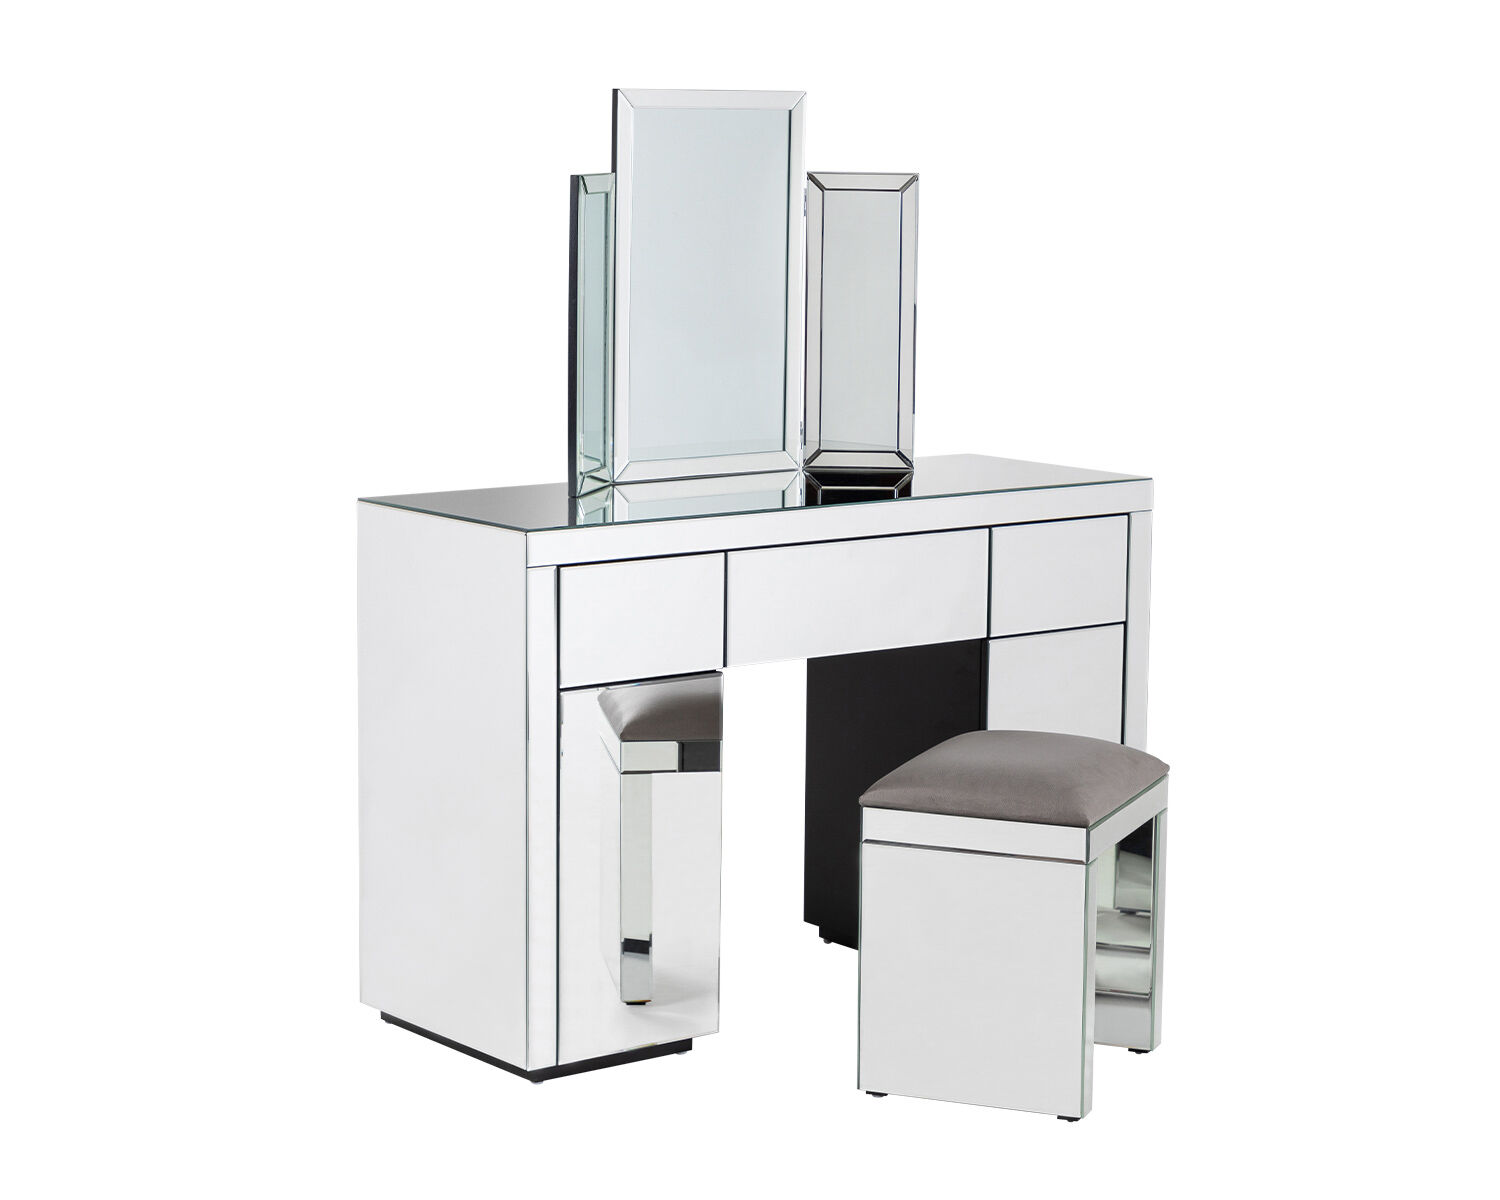 Lifestyle Furniture Silver Mirrored Dressing Table Set With Mirror and Stool - Malmo